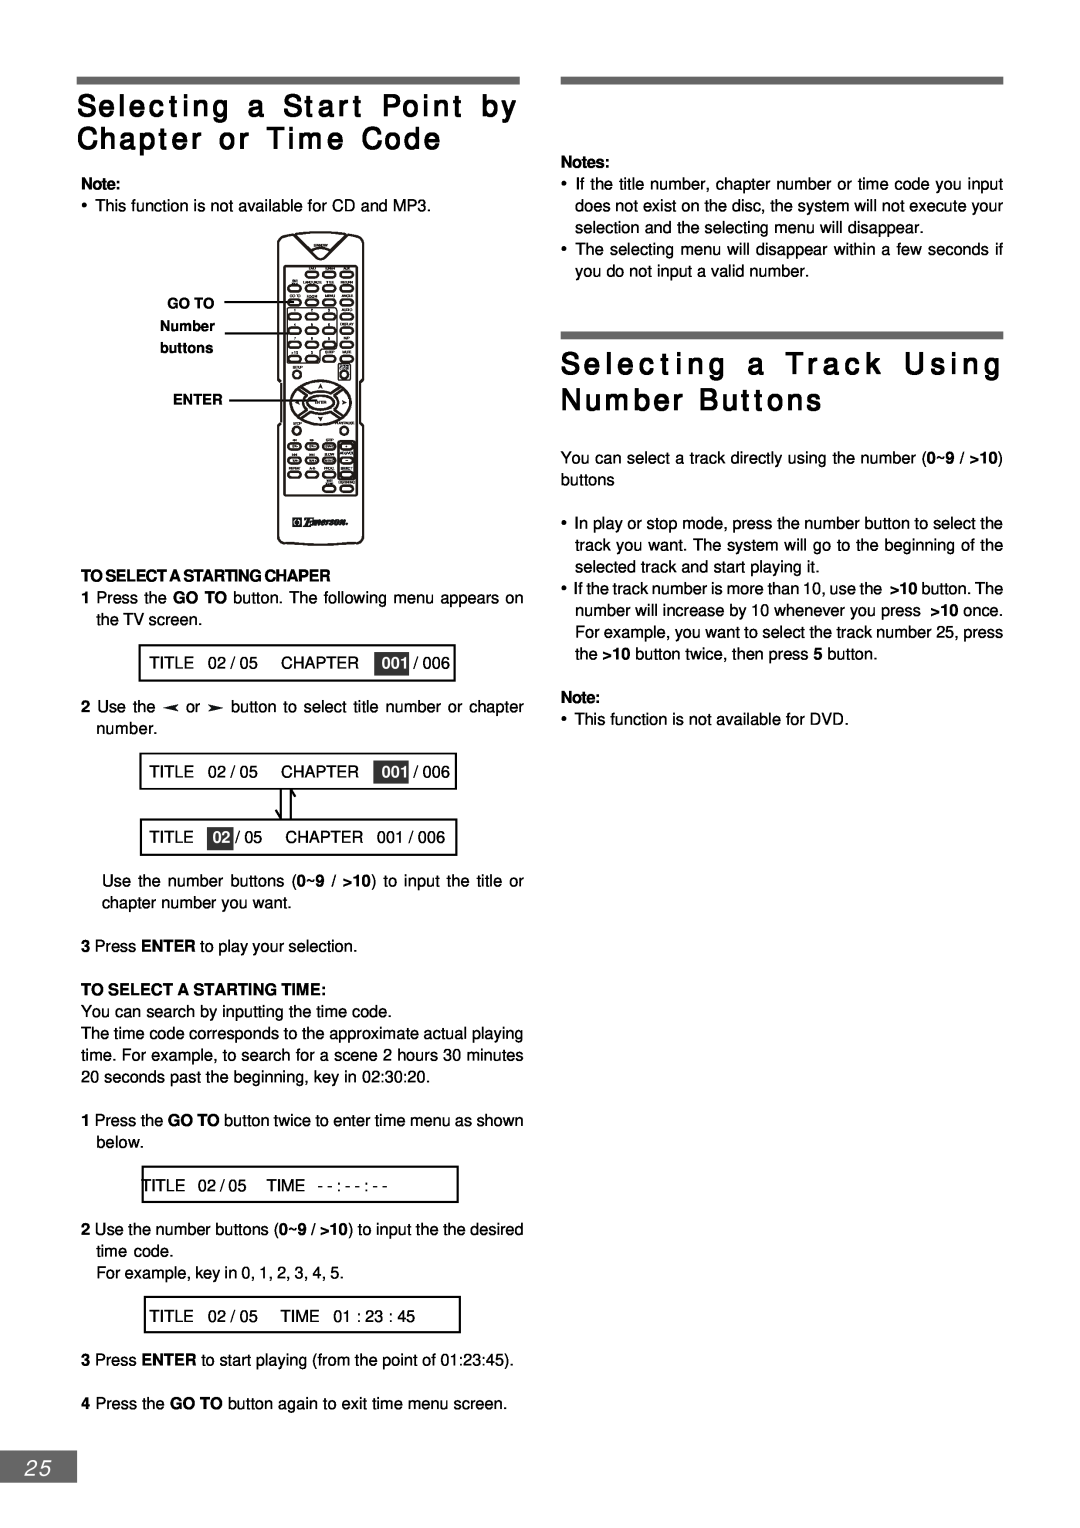 Emerson AV301 owner manual Selecting a Start Point by Chapter or Time Code, Selecting a Track Using Number Buttons 